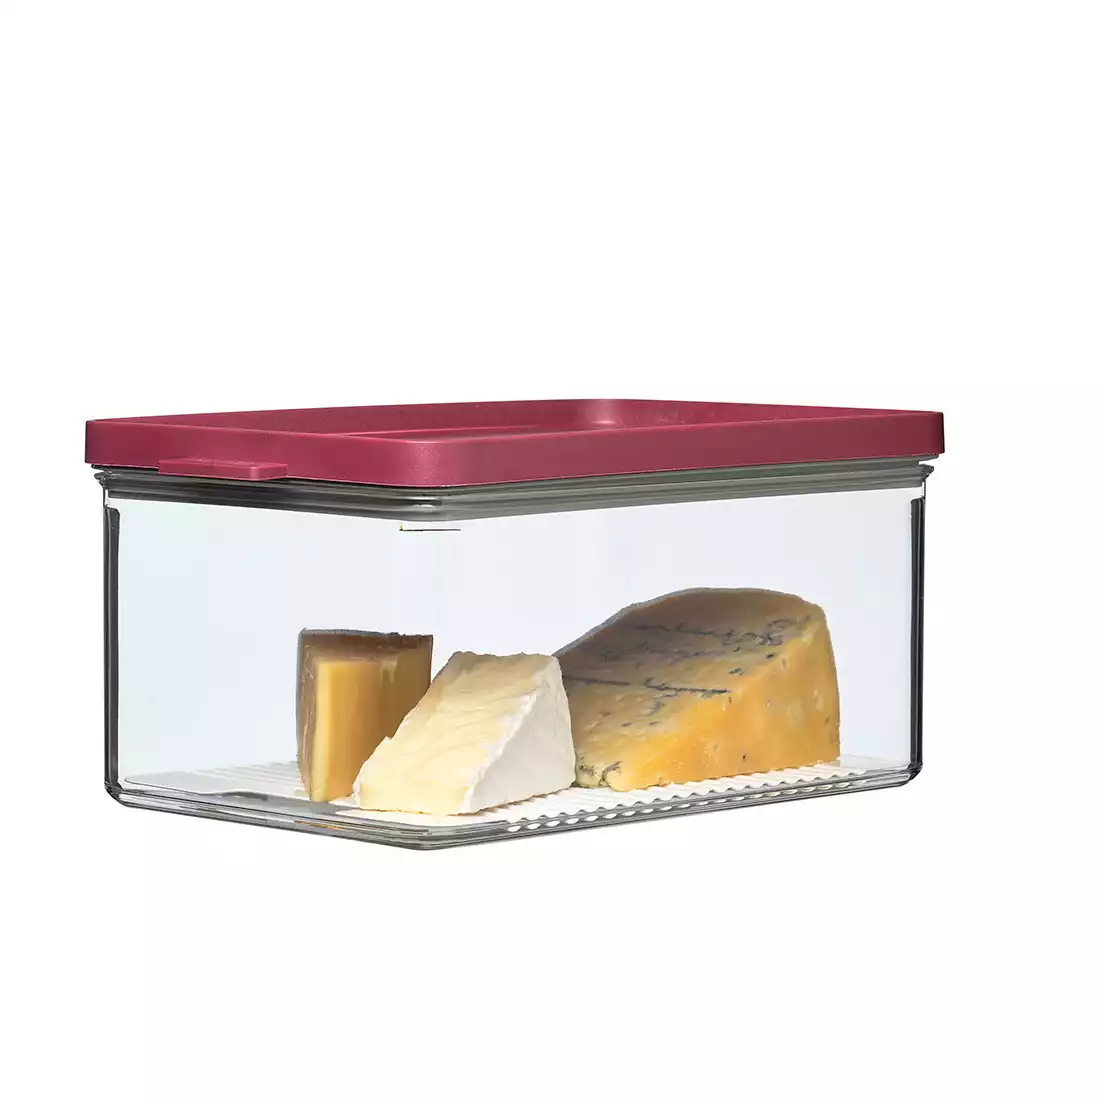 MEPAL OMNIA cheese container 2000 ml, berry